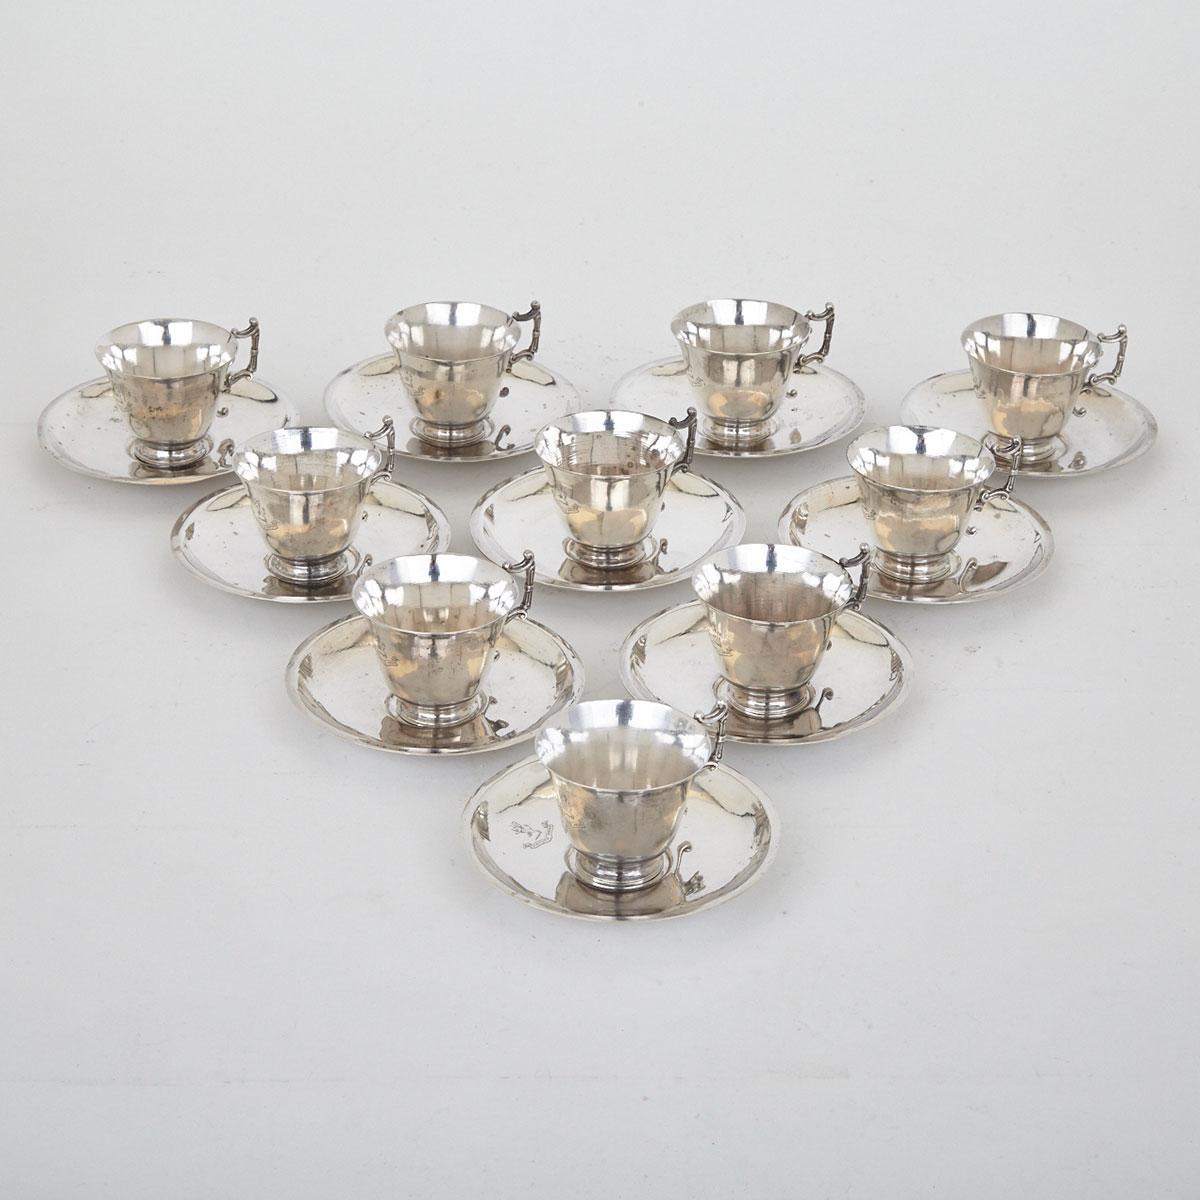 Ten Silver Cups and Saucers, probably South American, 20th Century